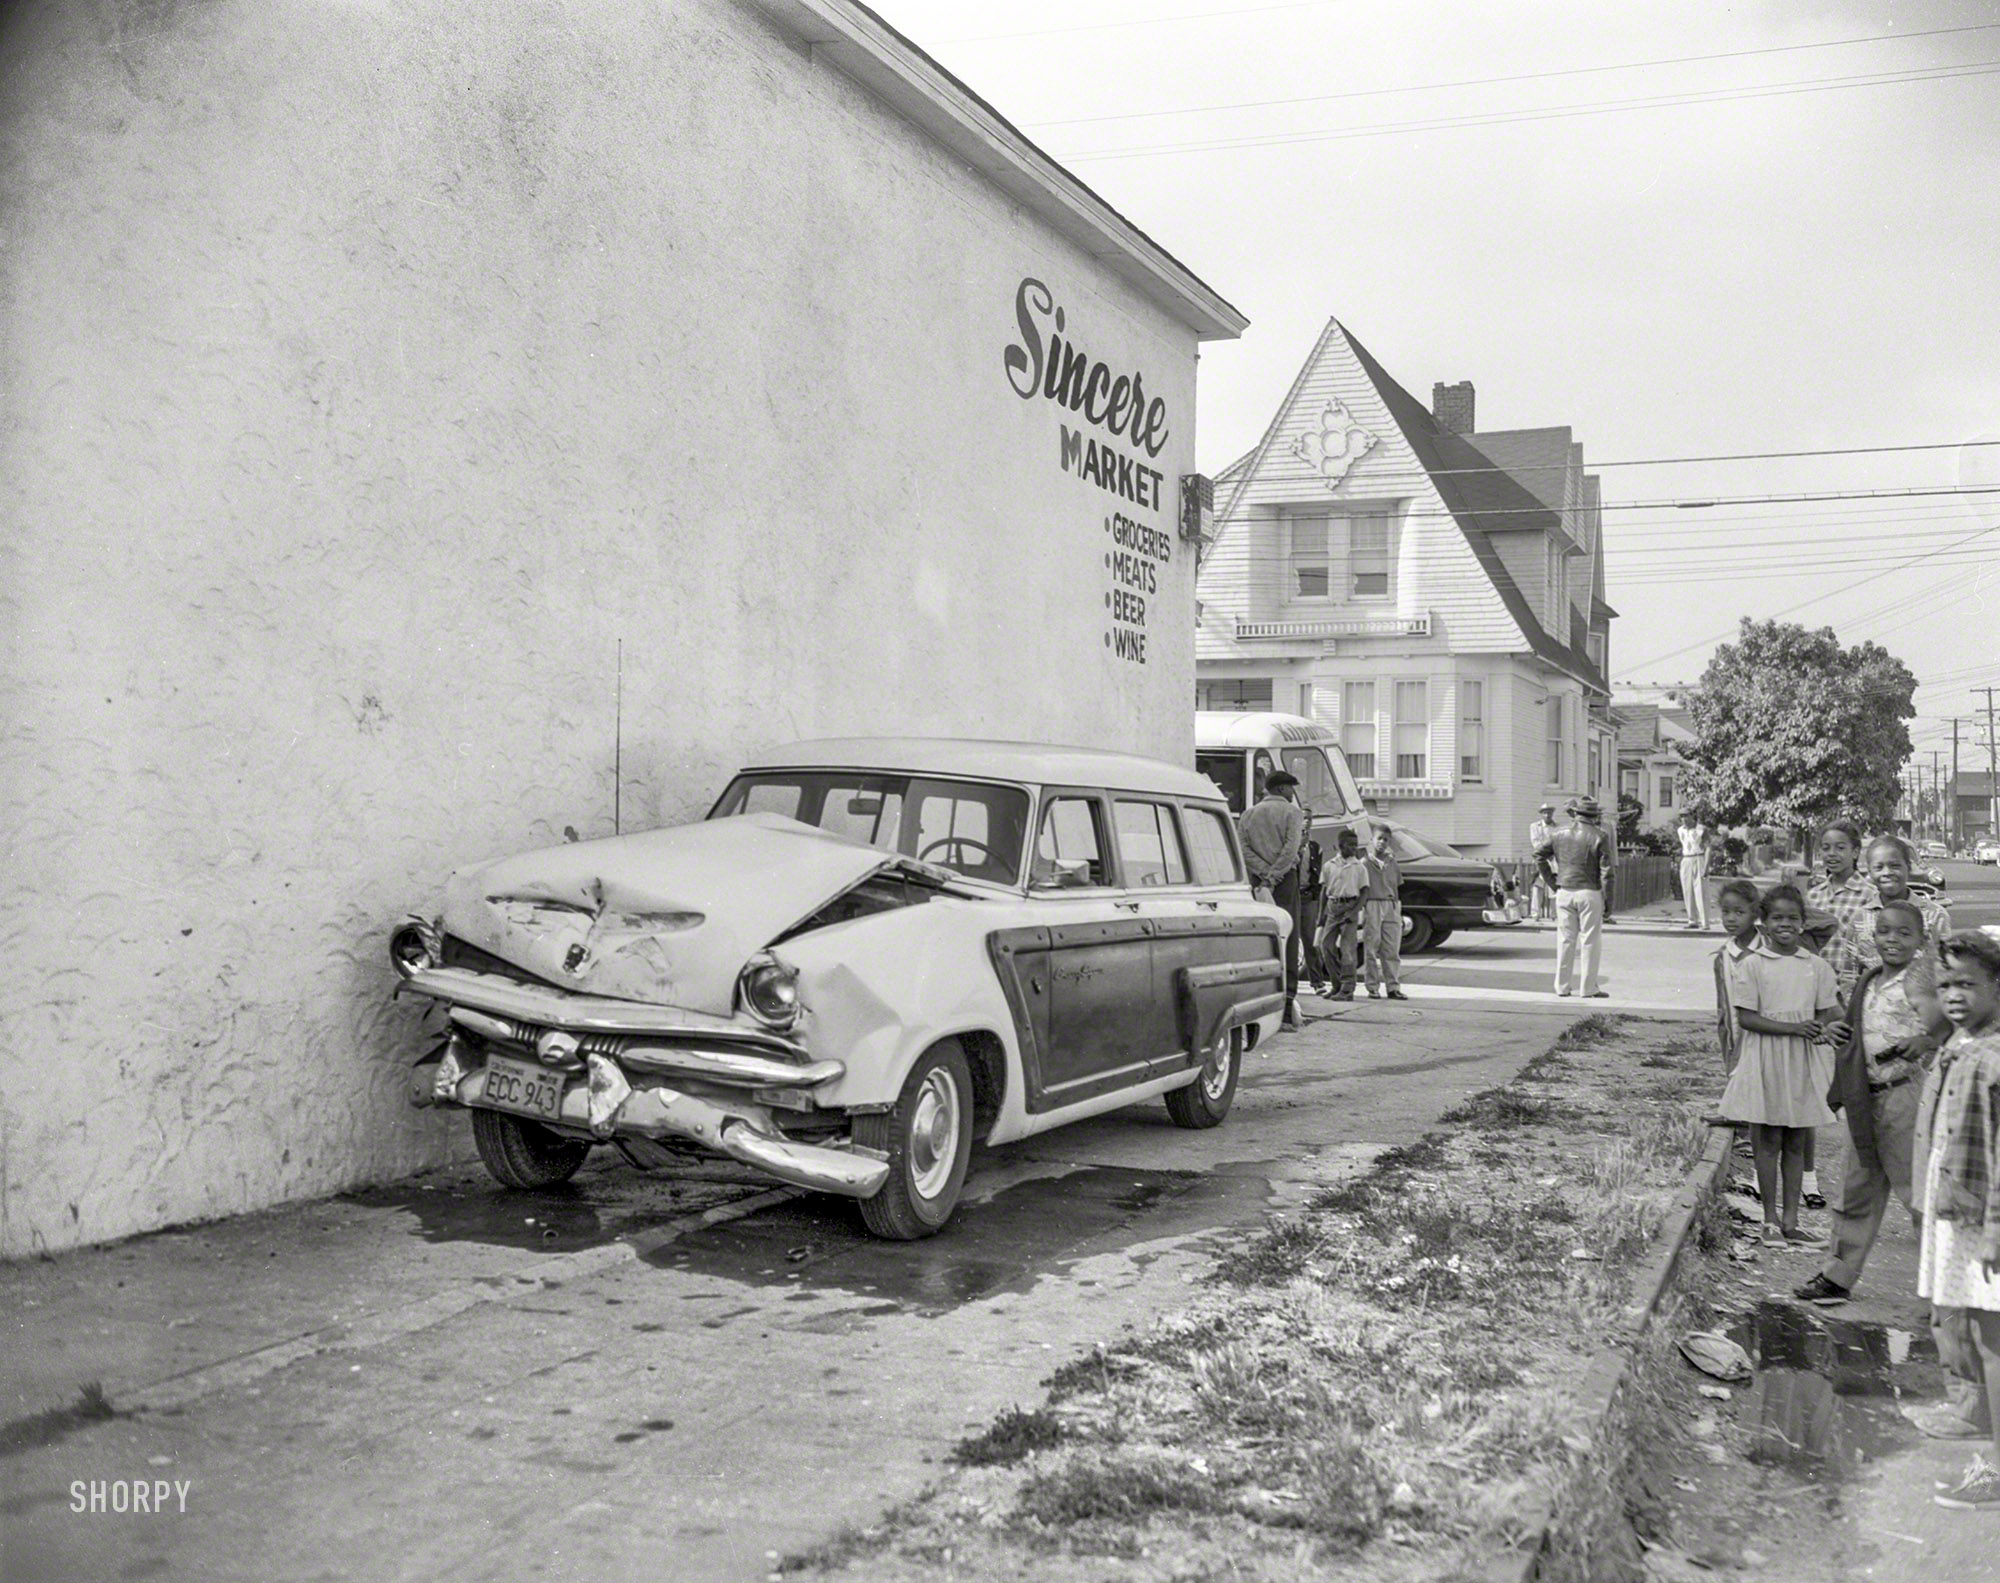 "Collision with bread truck." Returning to the scene of the crash at Sincere Market, Linden and 24th streets in Oakland, Calif., circa 1958. View full size.